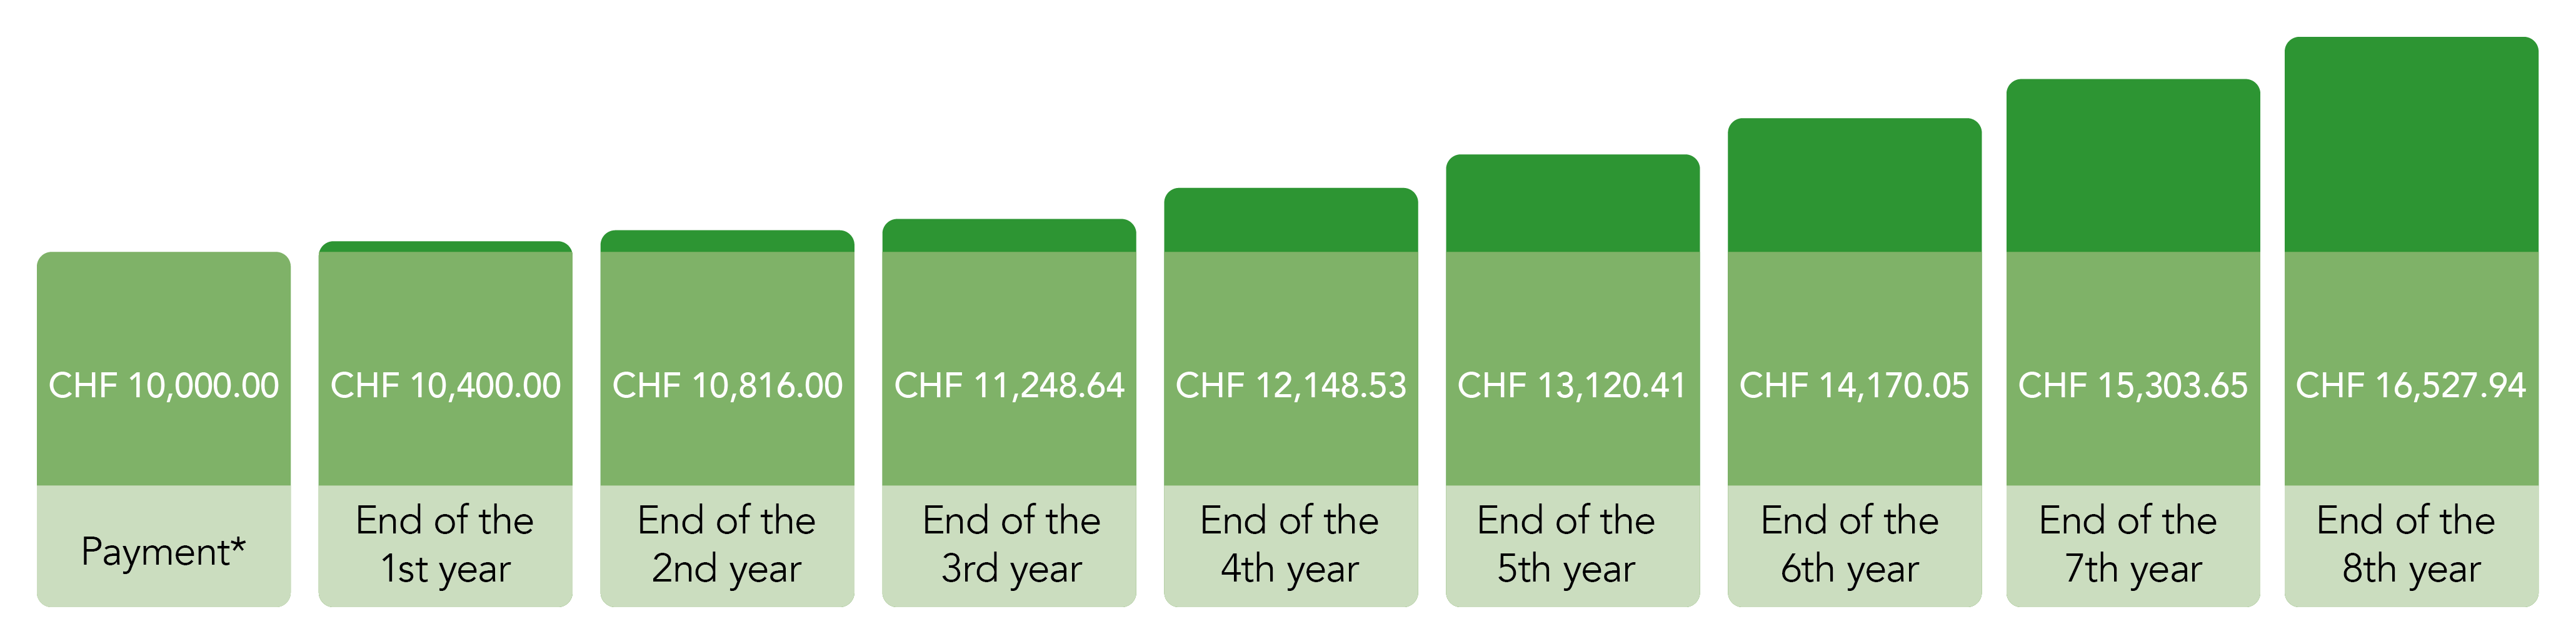 Diagram showing the interest in subsequent years after a one-off payment - more information can be found in the description of the image.